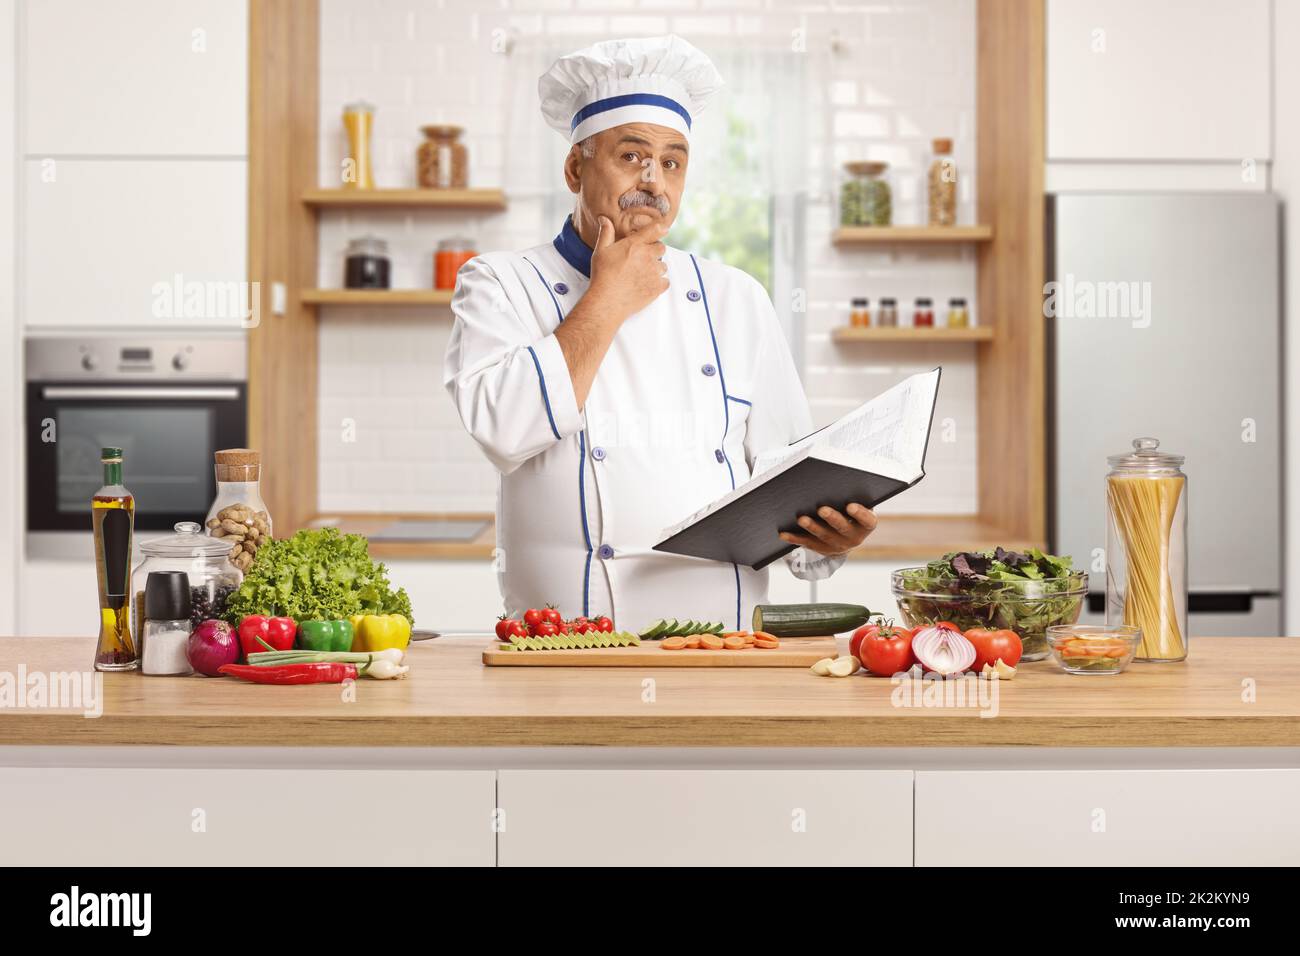 Mature male chef behind a kitchen counter holding a cook book and thinking Stock Photo